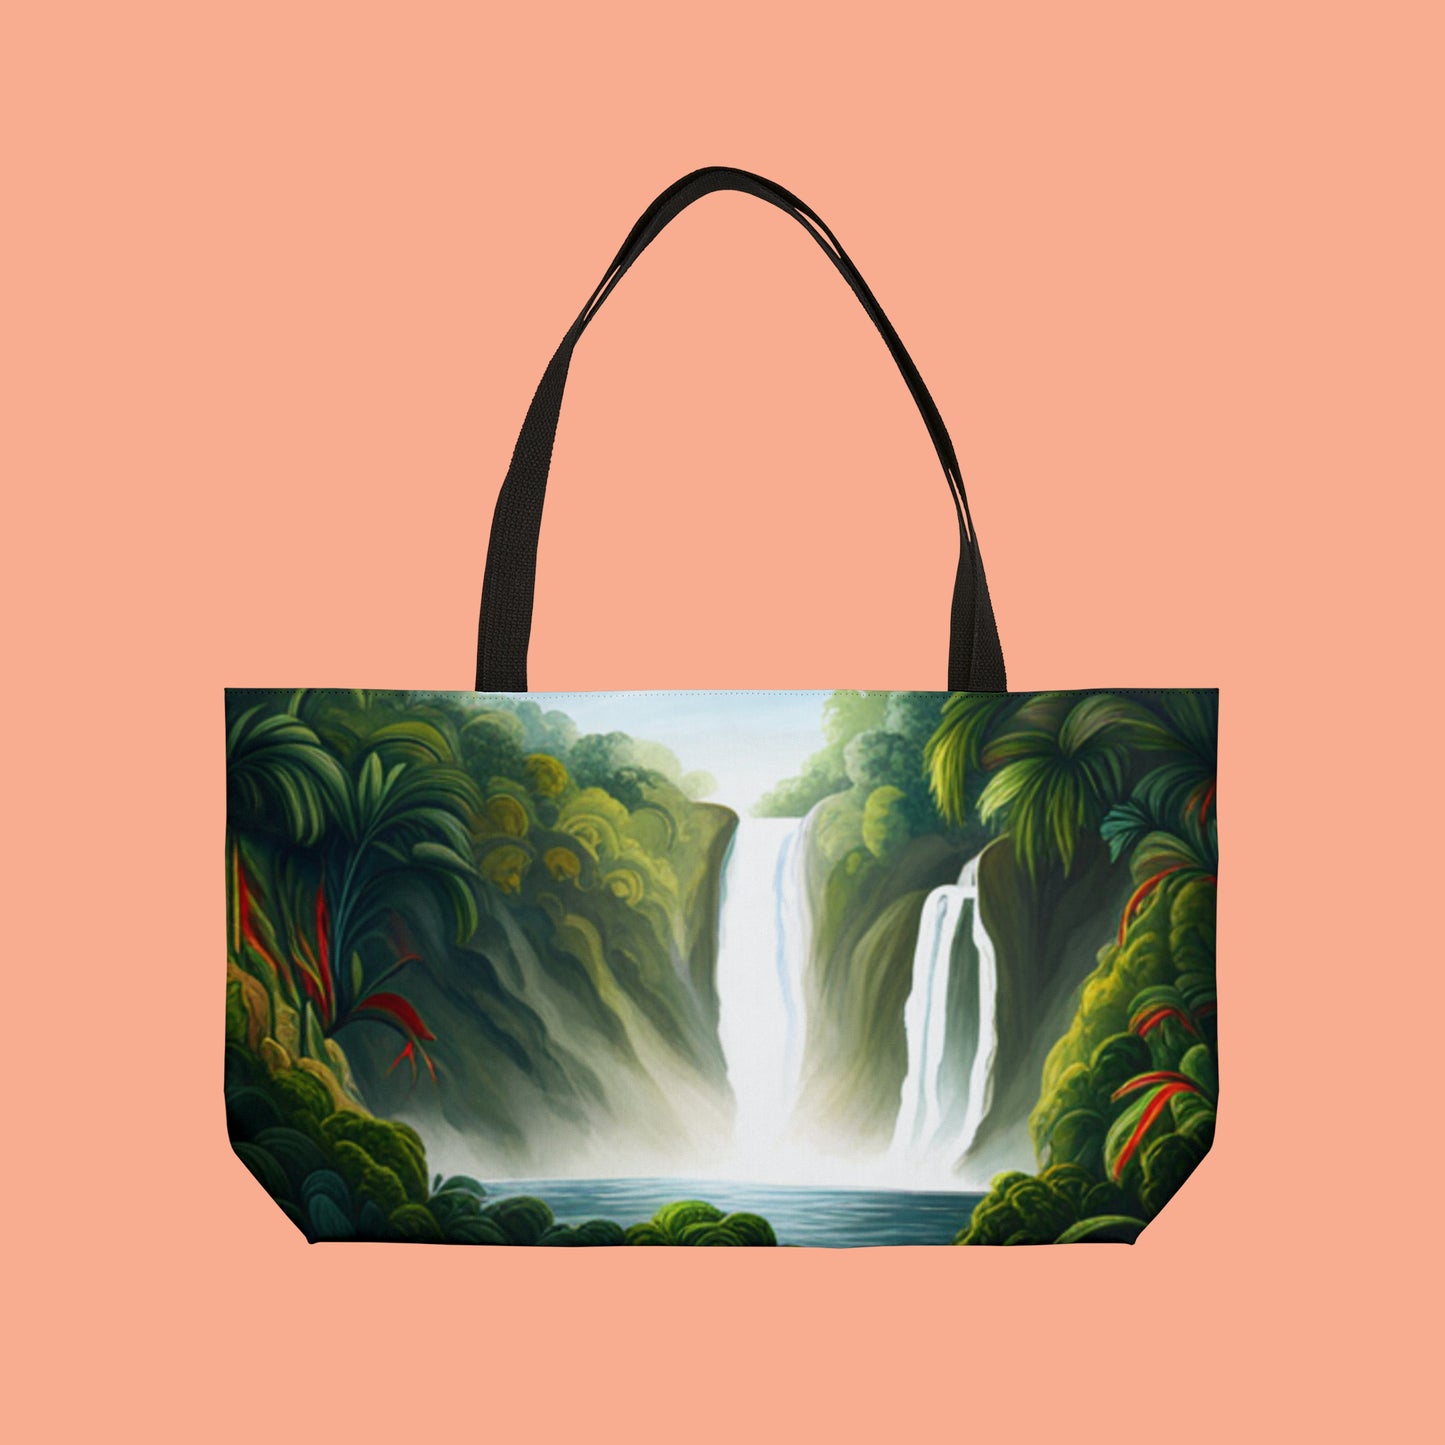 A lush waterfalls scene inspired design on this Weekender Tote Bag.